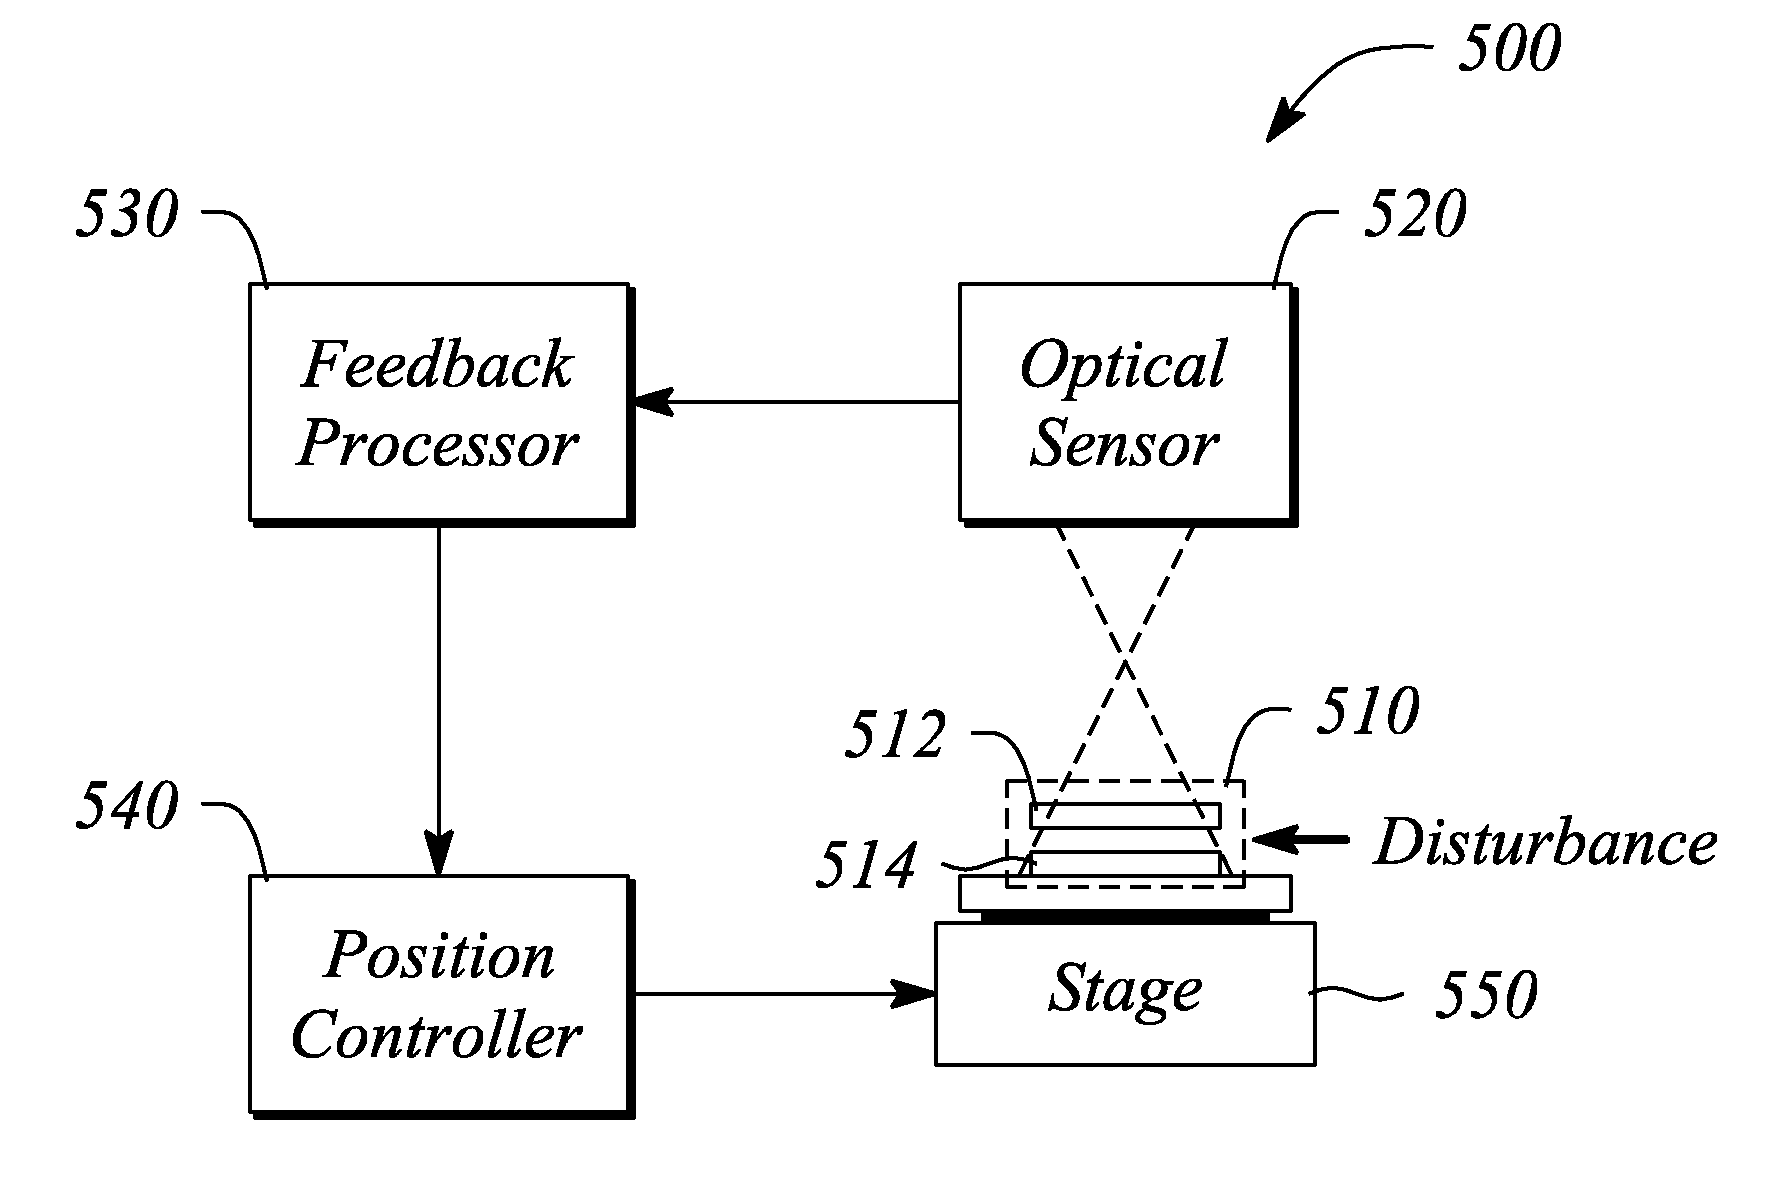 LITHOGRAPHY ALIGNMENT SYSTEM AND METHOD USING nDSE-BASED FEEDBACK CONTROL